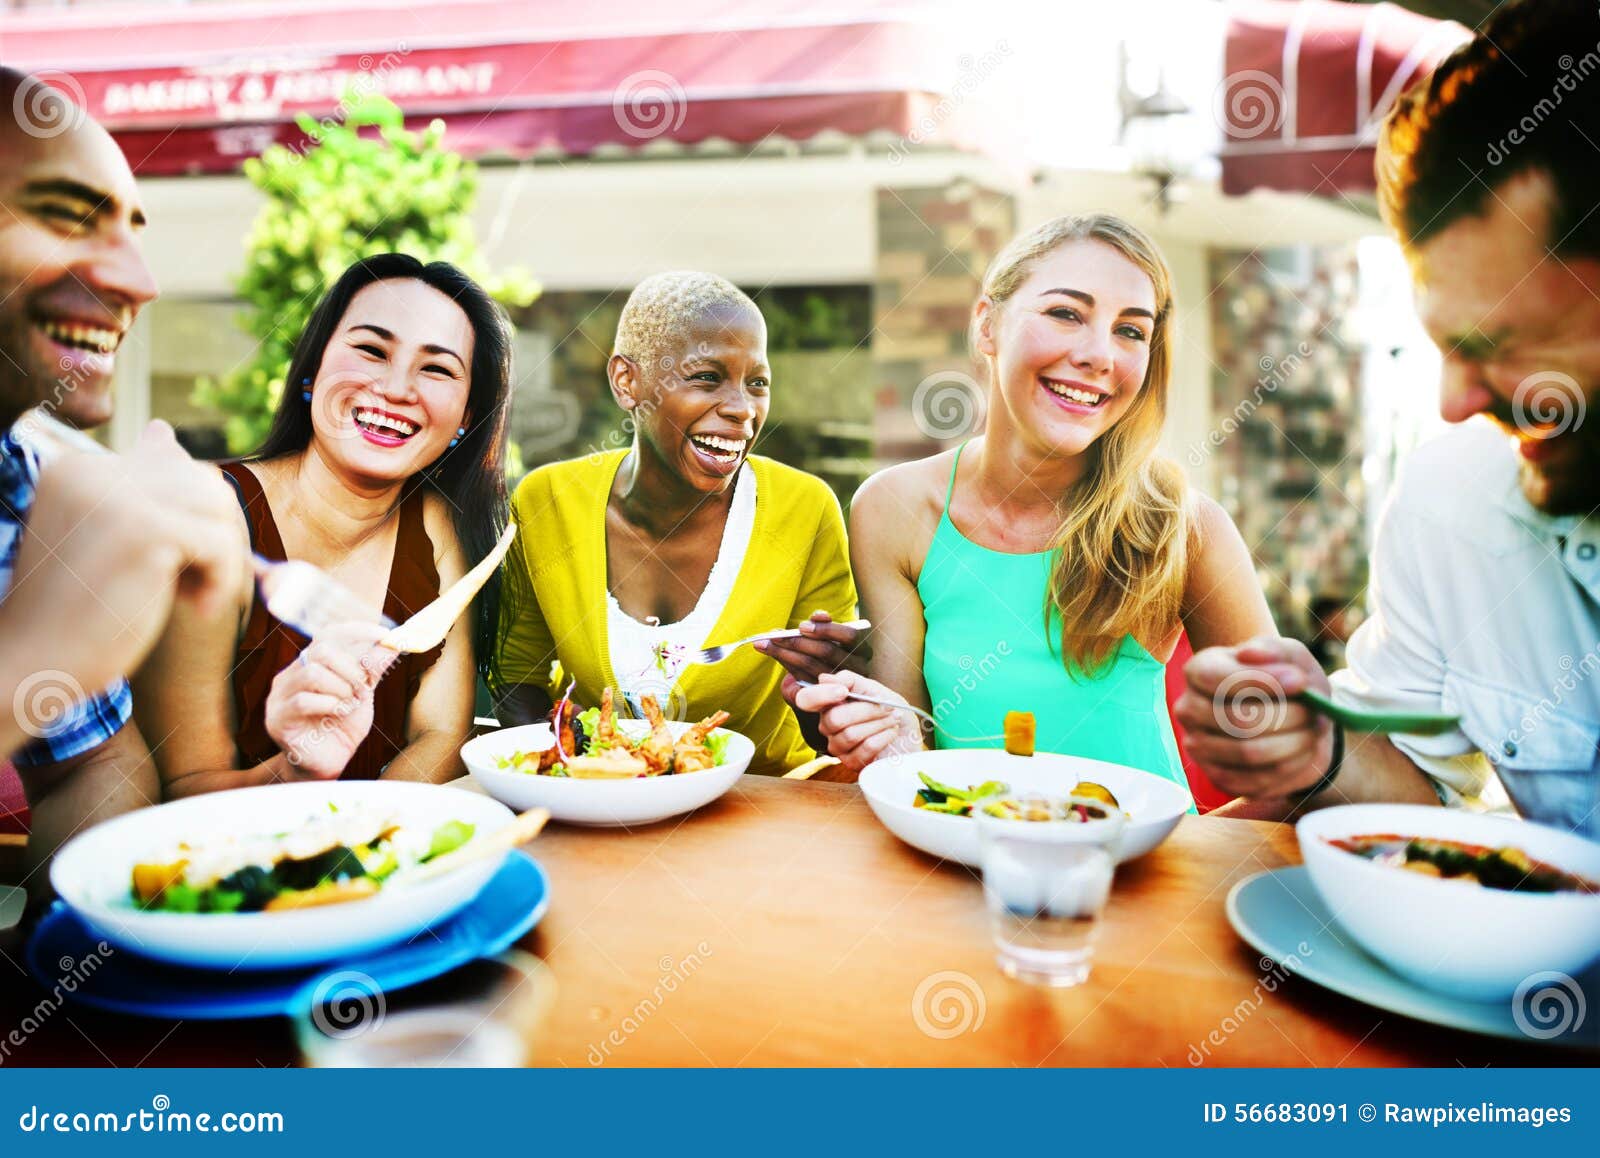 diverse people luncheon outdoors food concept